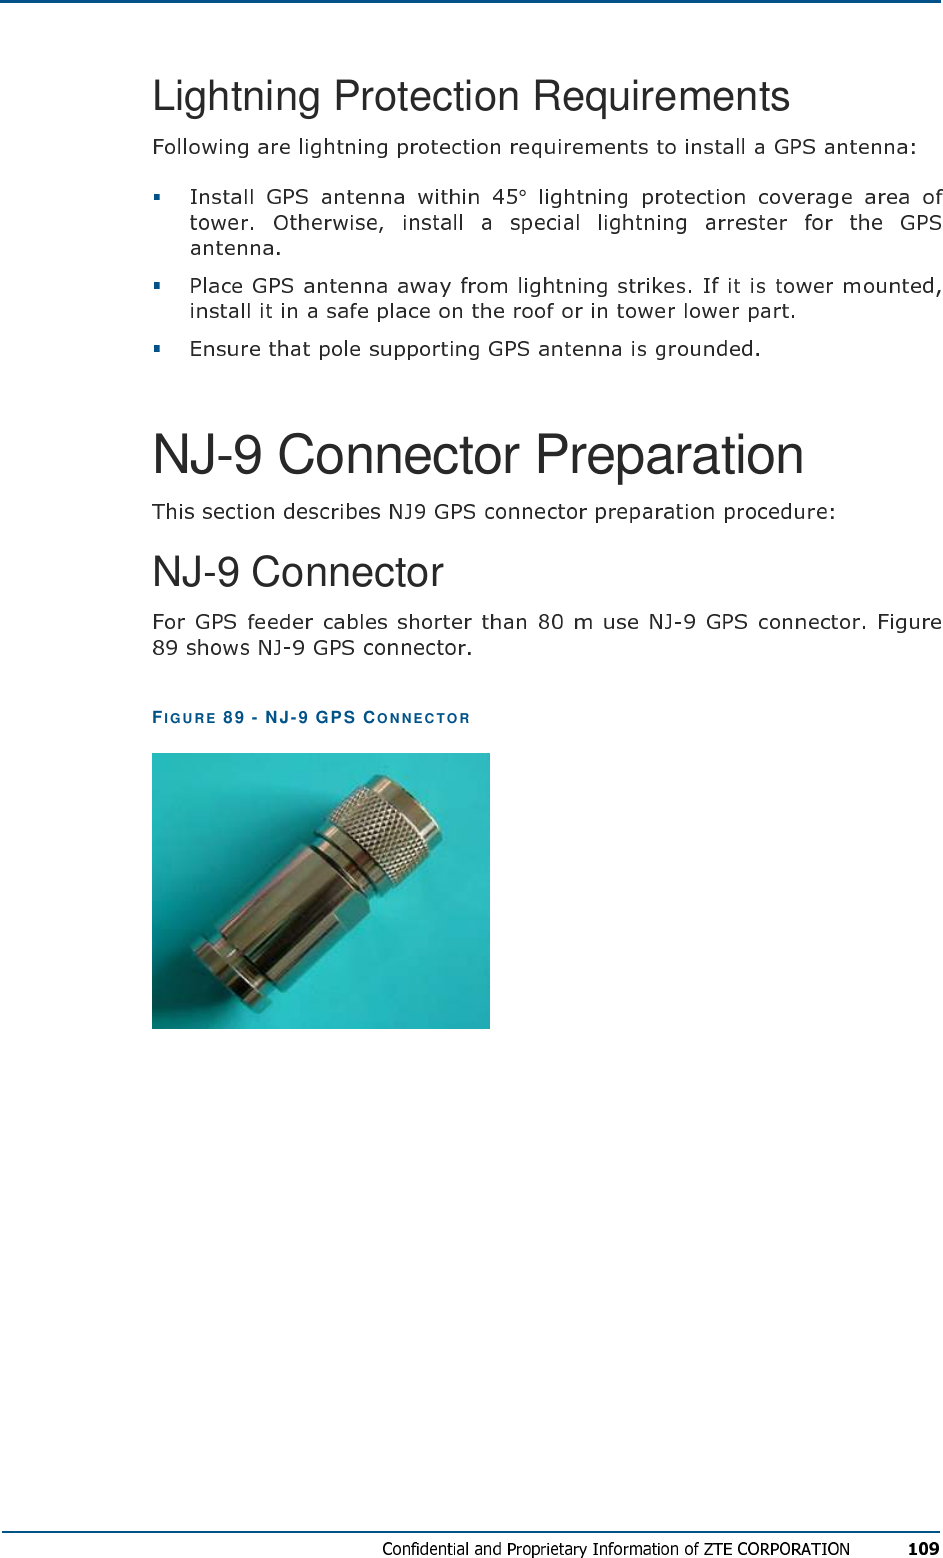 Lightning Protection Requirements  °  NJ-9 Connector Preparation NJ-9 Connector FIG U R E   89 - NJ-9 GPS CO N N E C TO R   